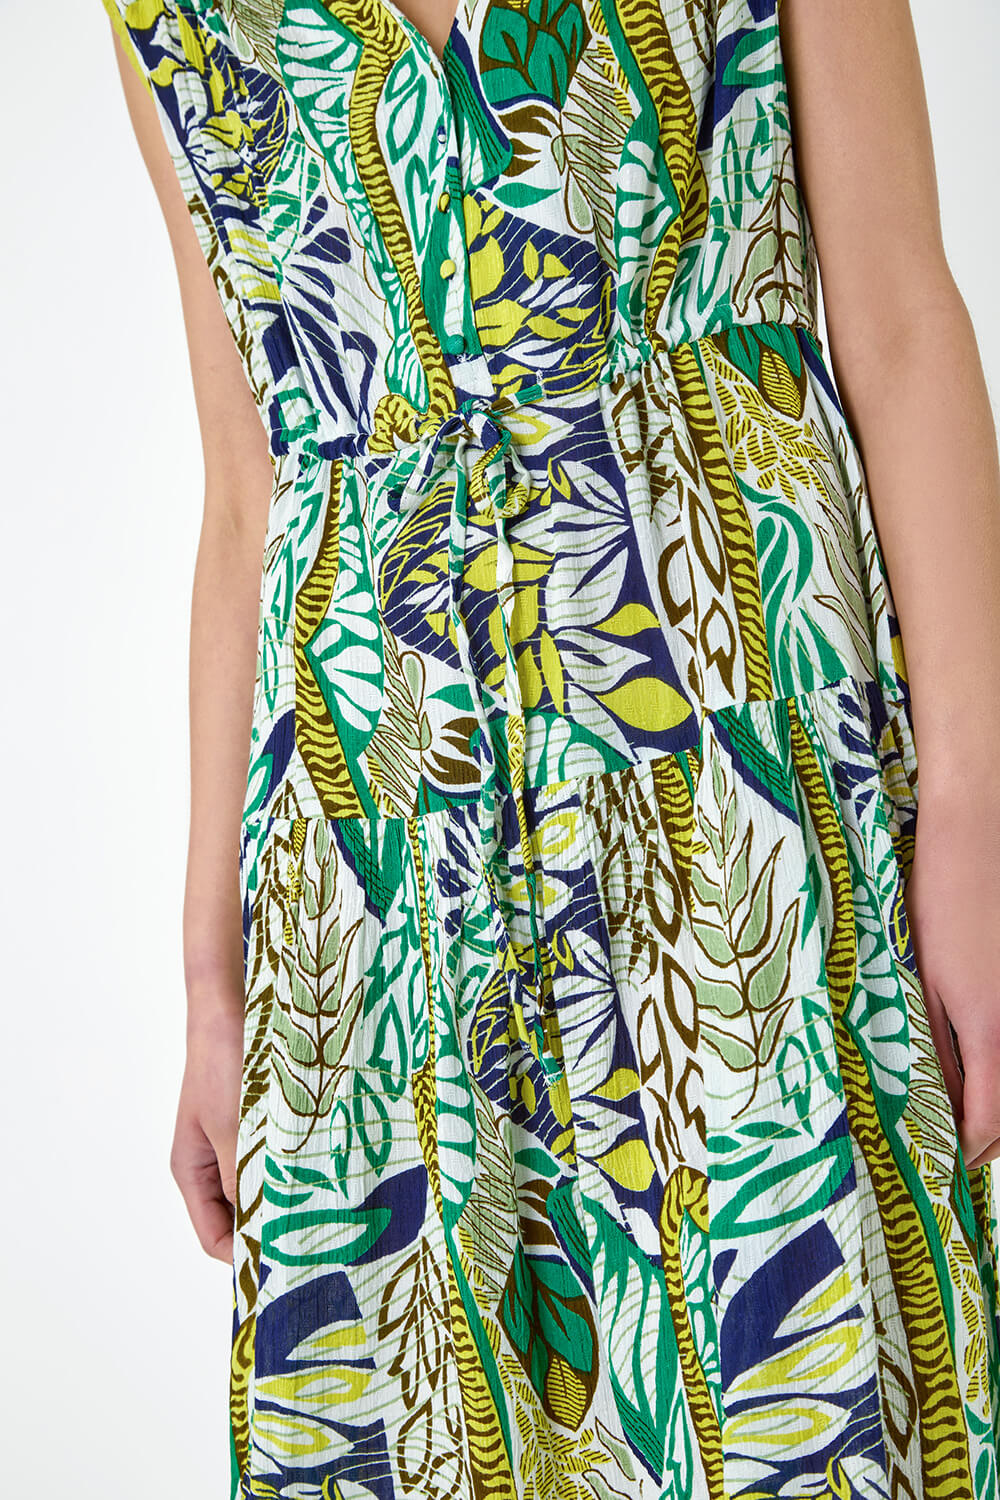 Lime Leaf Print Tiered Woven Dress, Image 5 of 5